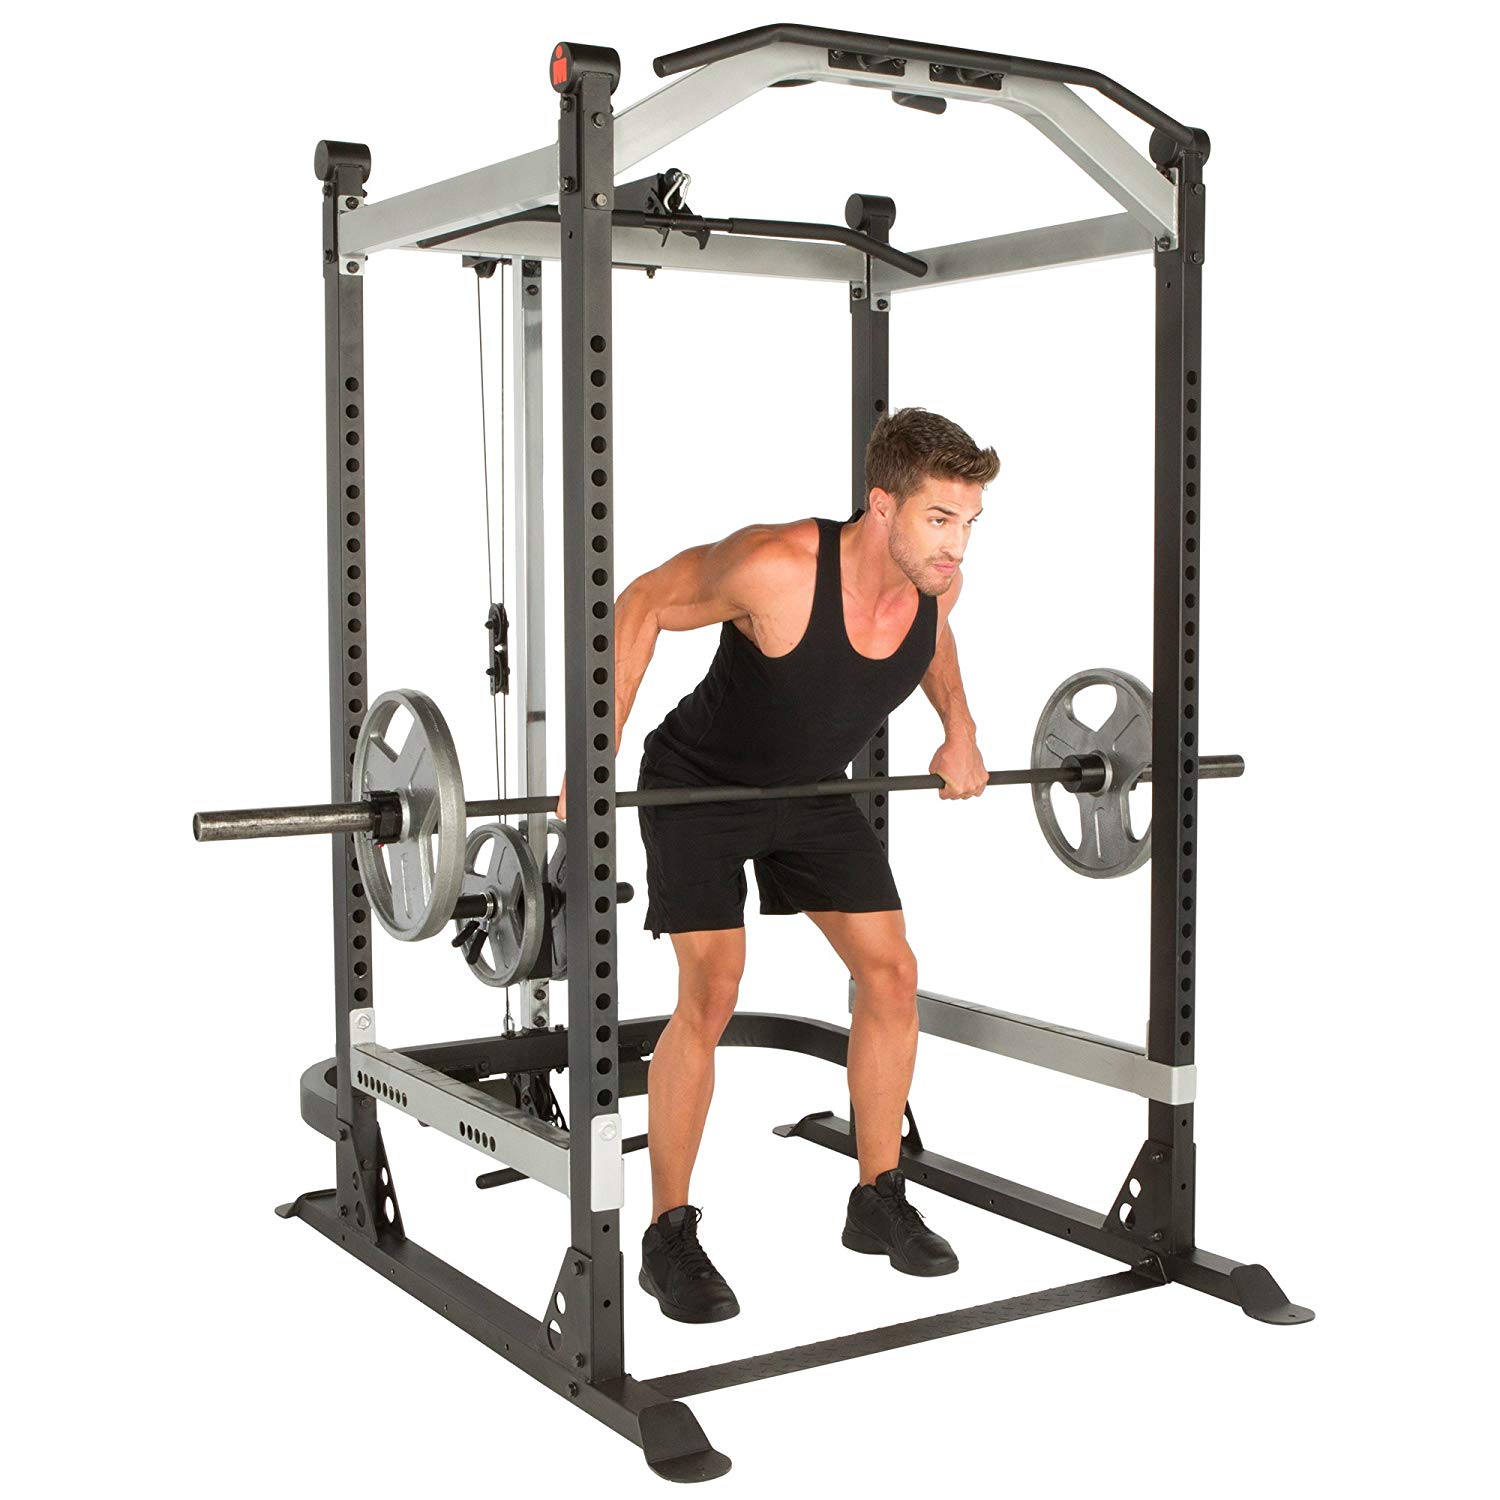 Fitness Reality X-Class Light Commercial High Capacity Olympic Power Cage with Lat pull $598.98